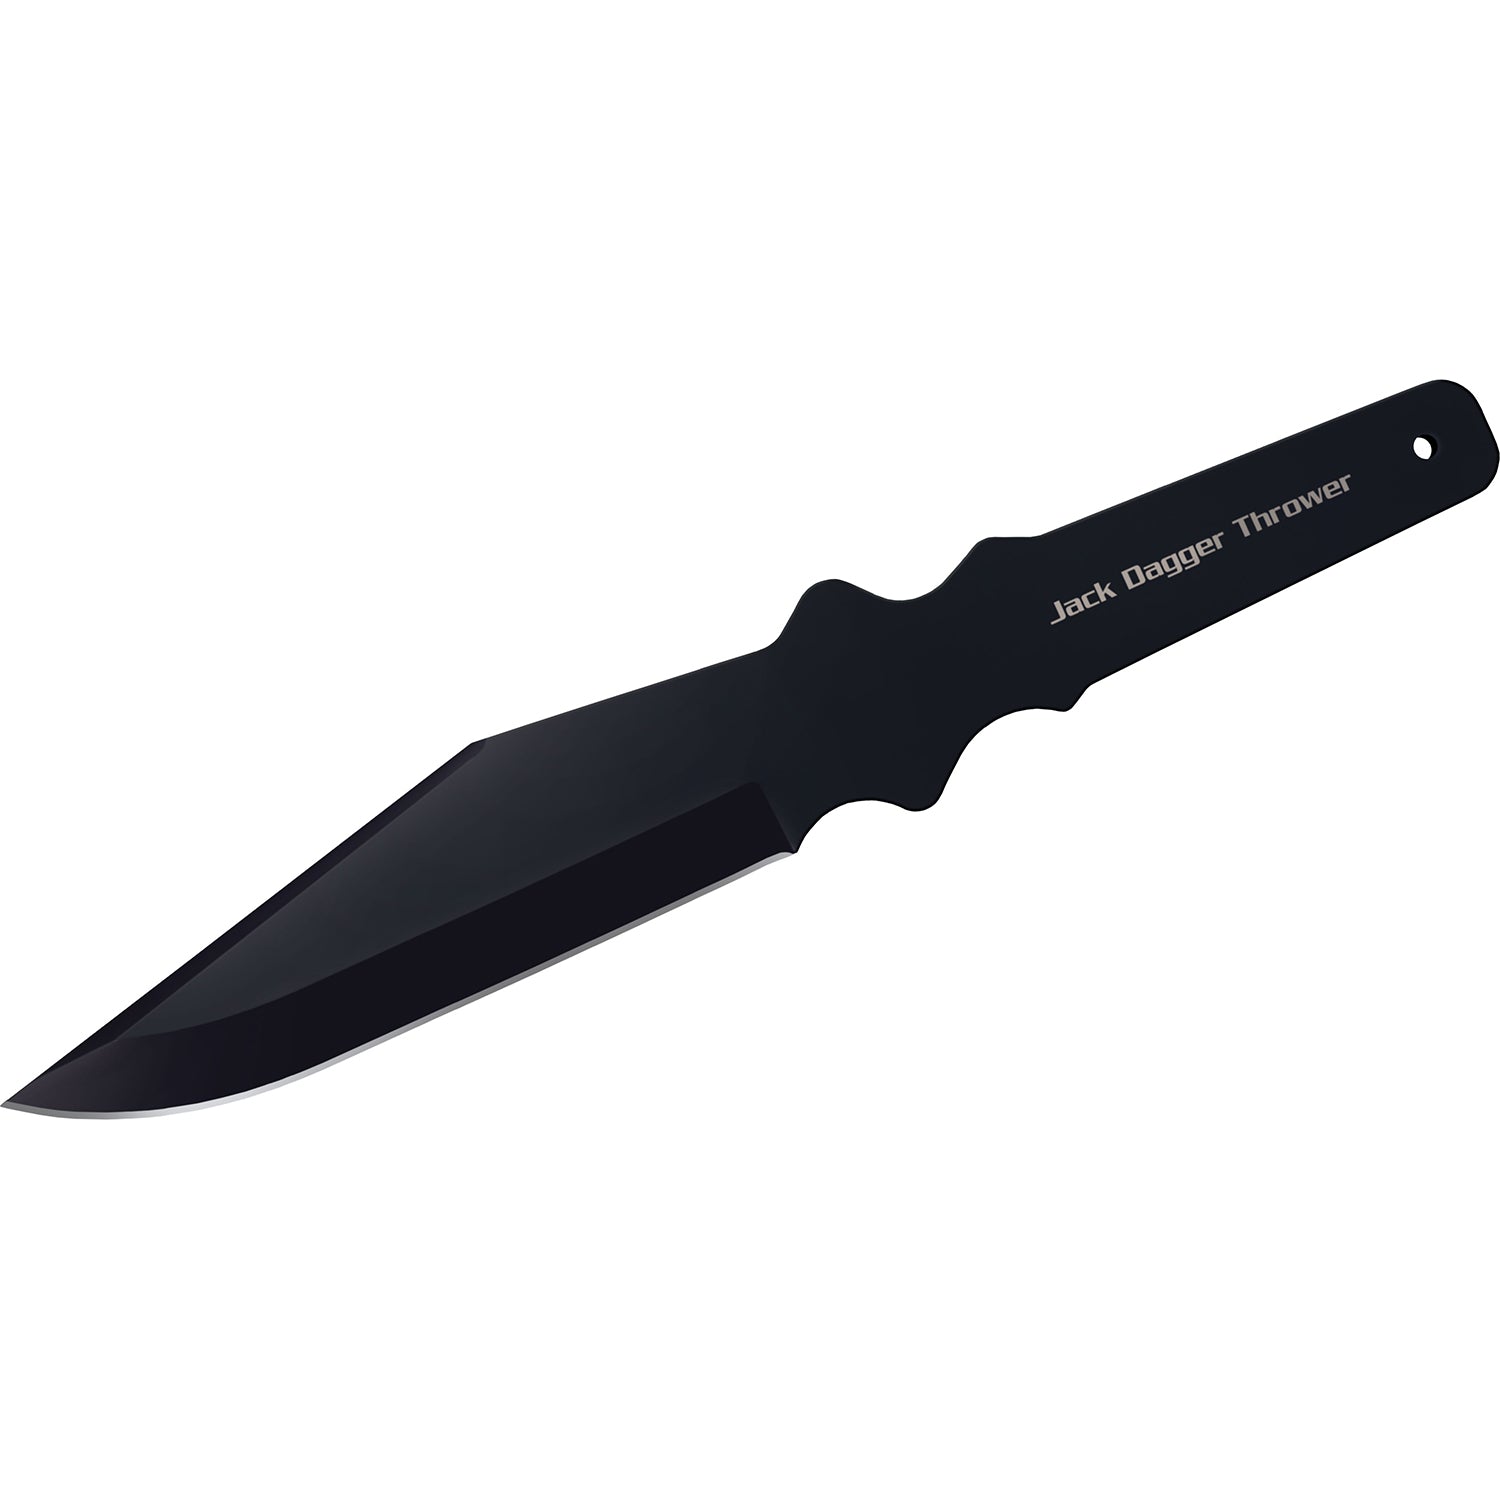 Cold Steel Jack Dagger Thrower 14.0 in Overall Length